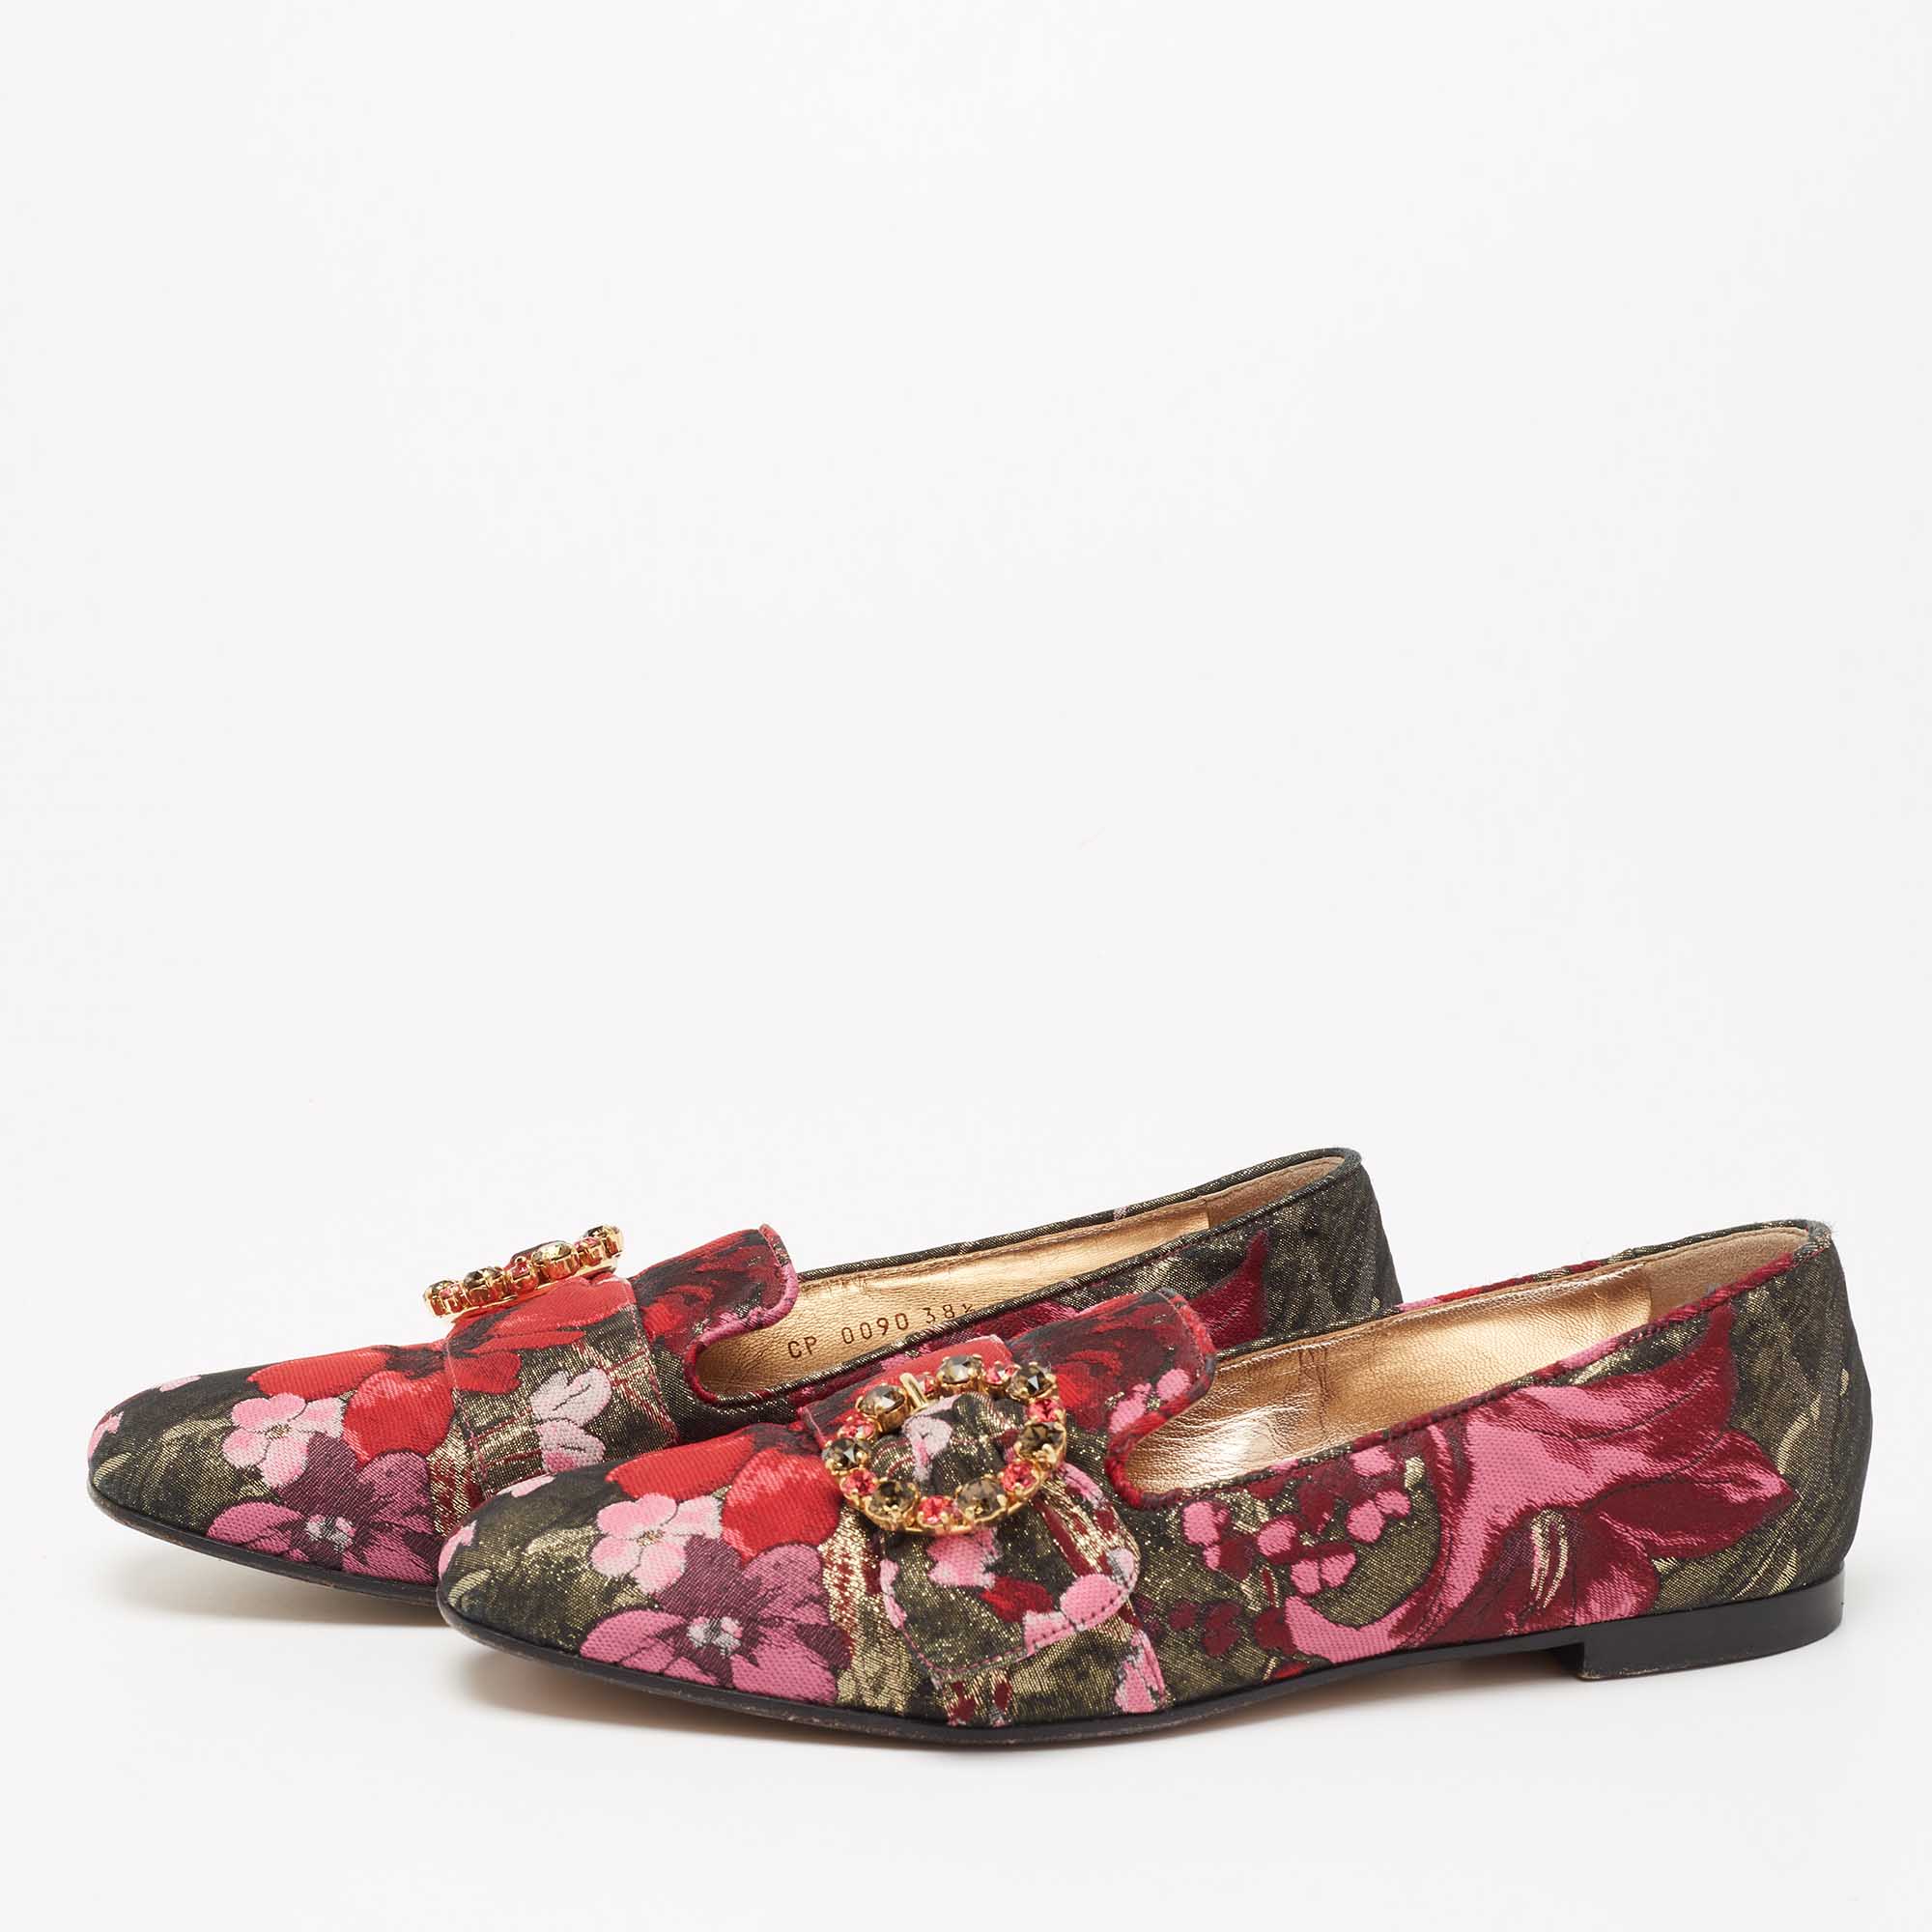 

Dolce & Gabbana Multicolor Floral Jacquard Fabric Crystal Embellished Buckle Loafers Size